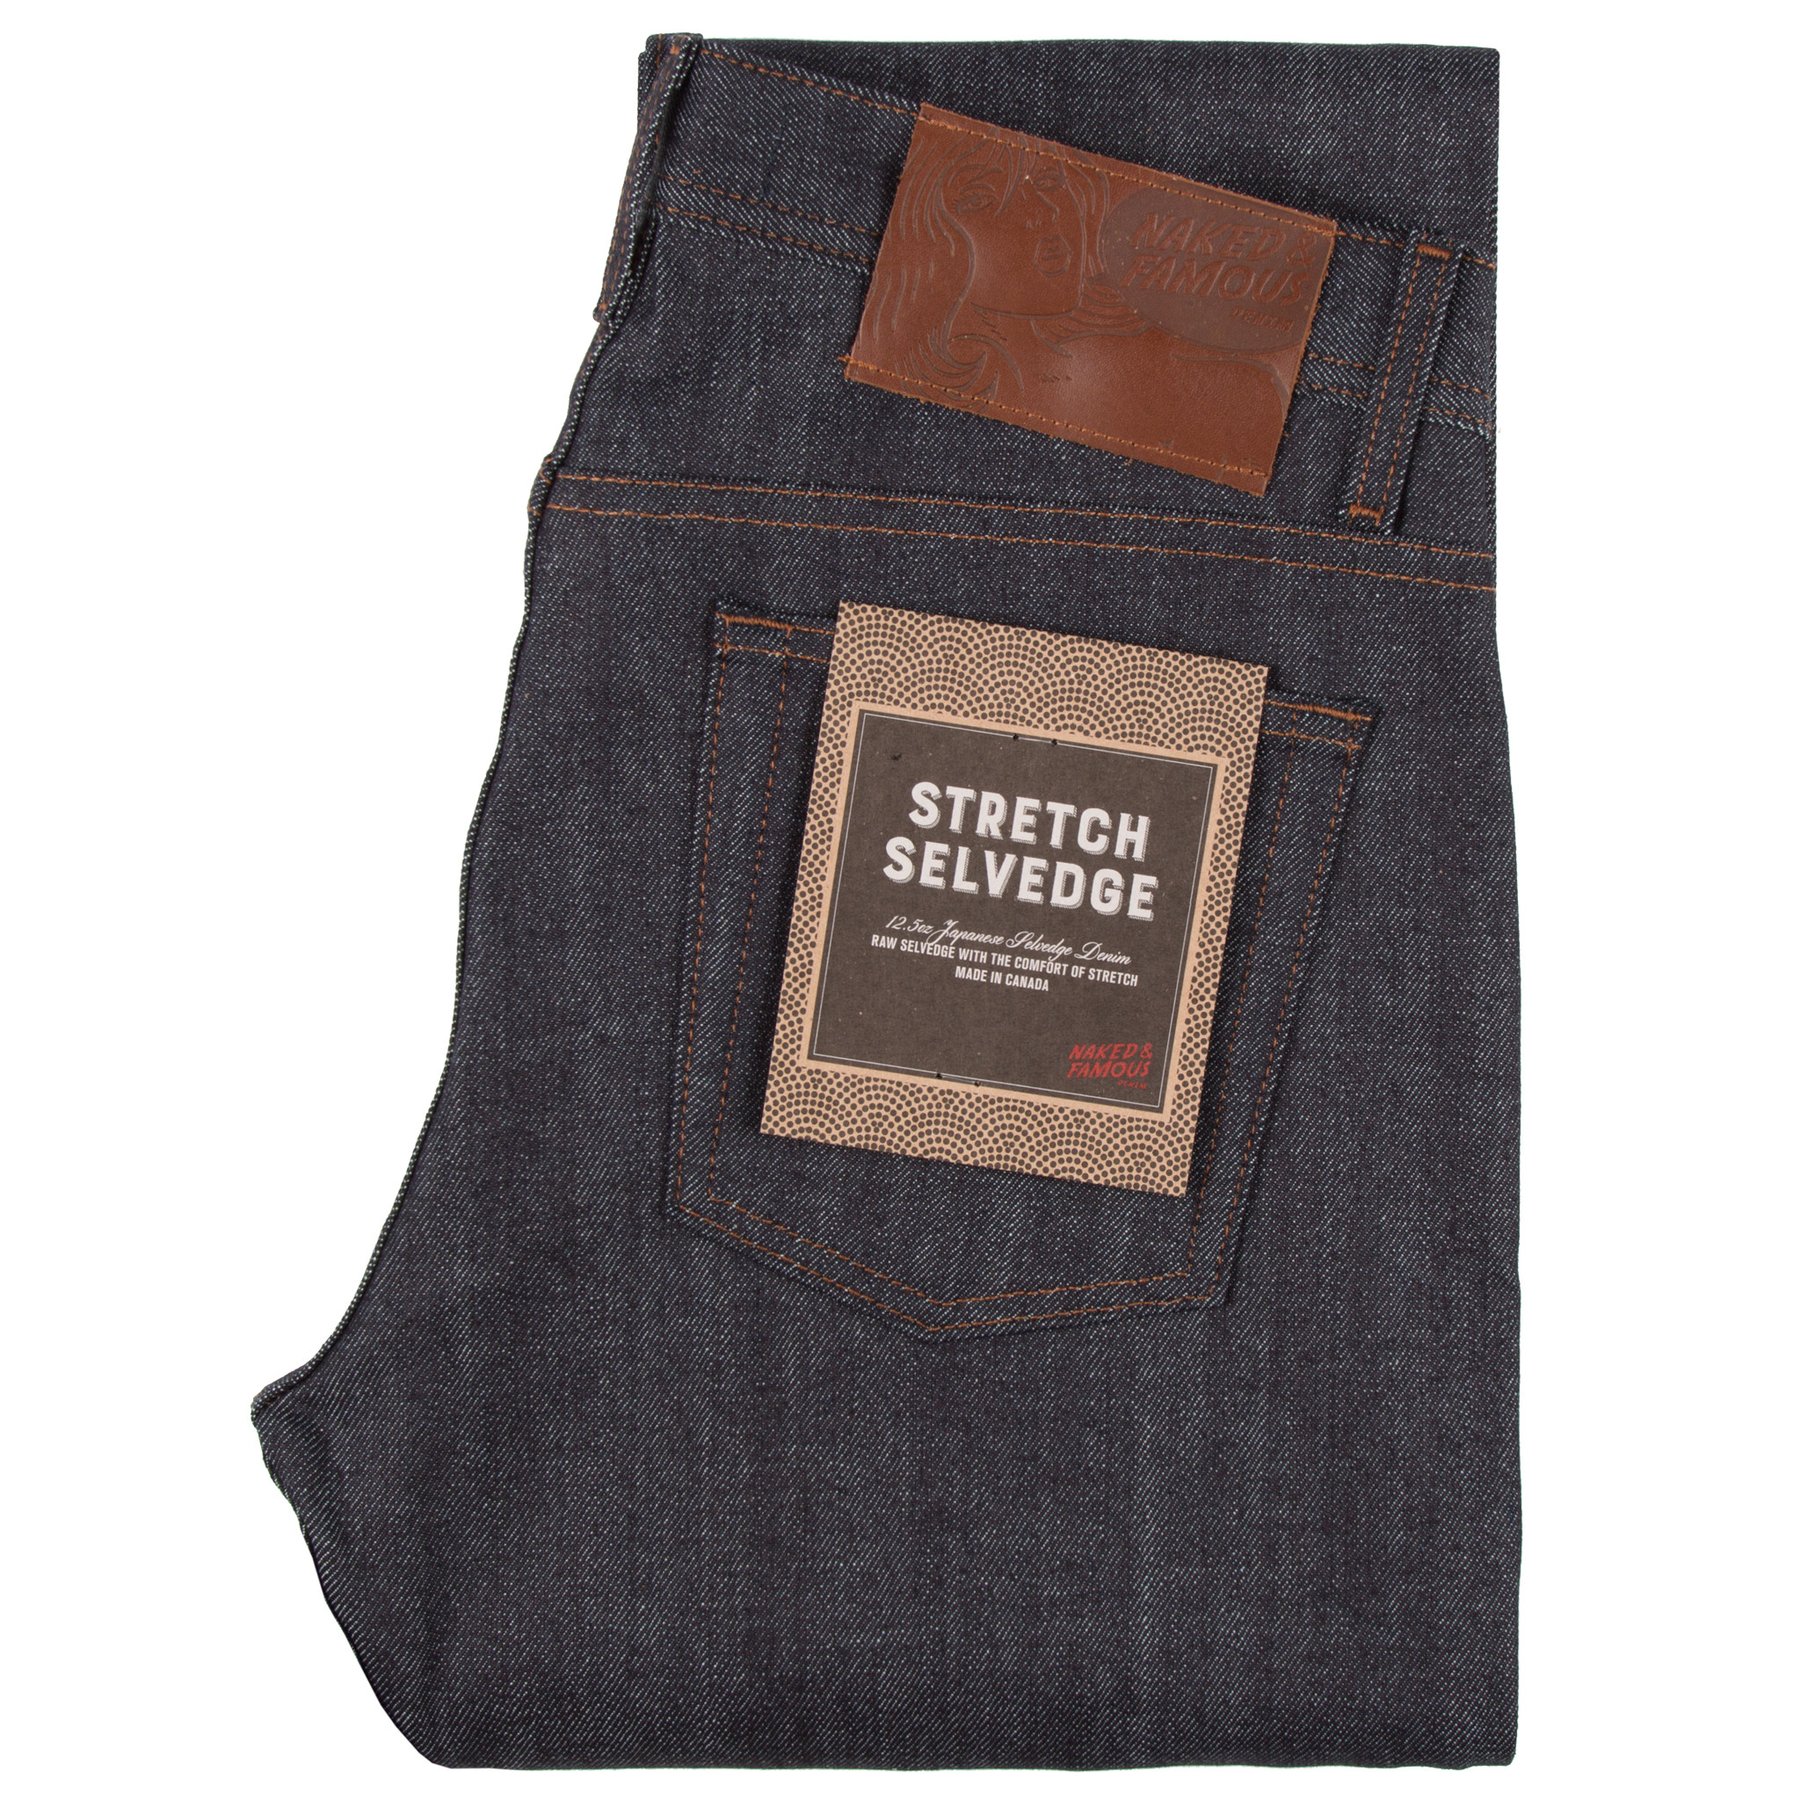  Stretch Selvedge Jeans Folded 